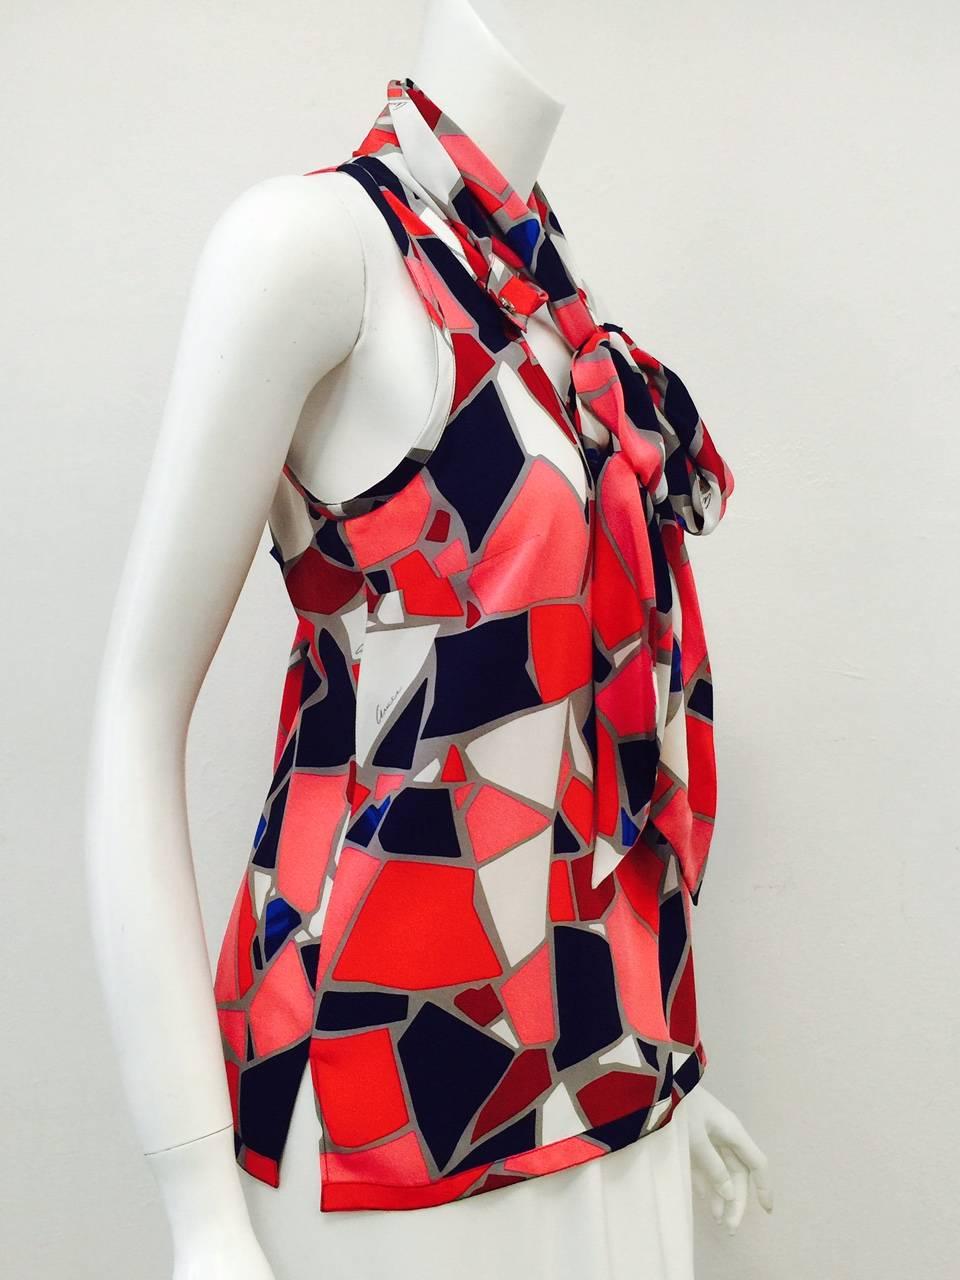 Gucci Silk Sleeveless Blouse is ageless and timeless!  Features bold abstract print in shades of navy, royal blue, red, burgundy, and rouge.  Elongated oval neckline incorporates voluminous, adjustable tie attached at the back of the neck and